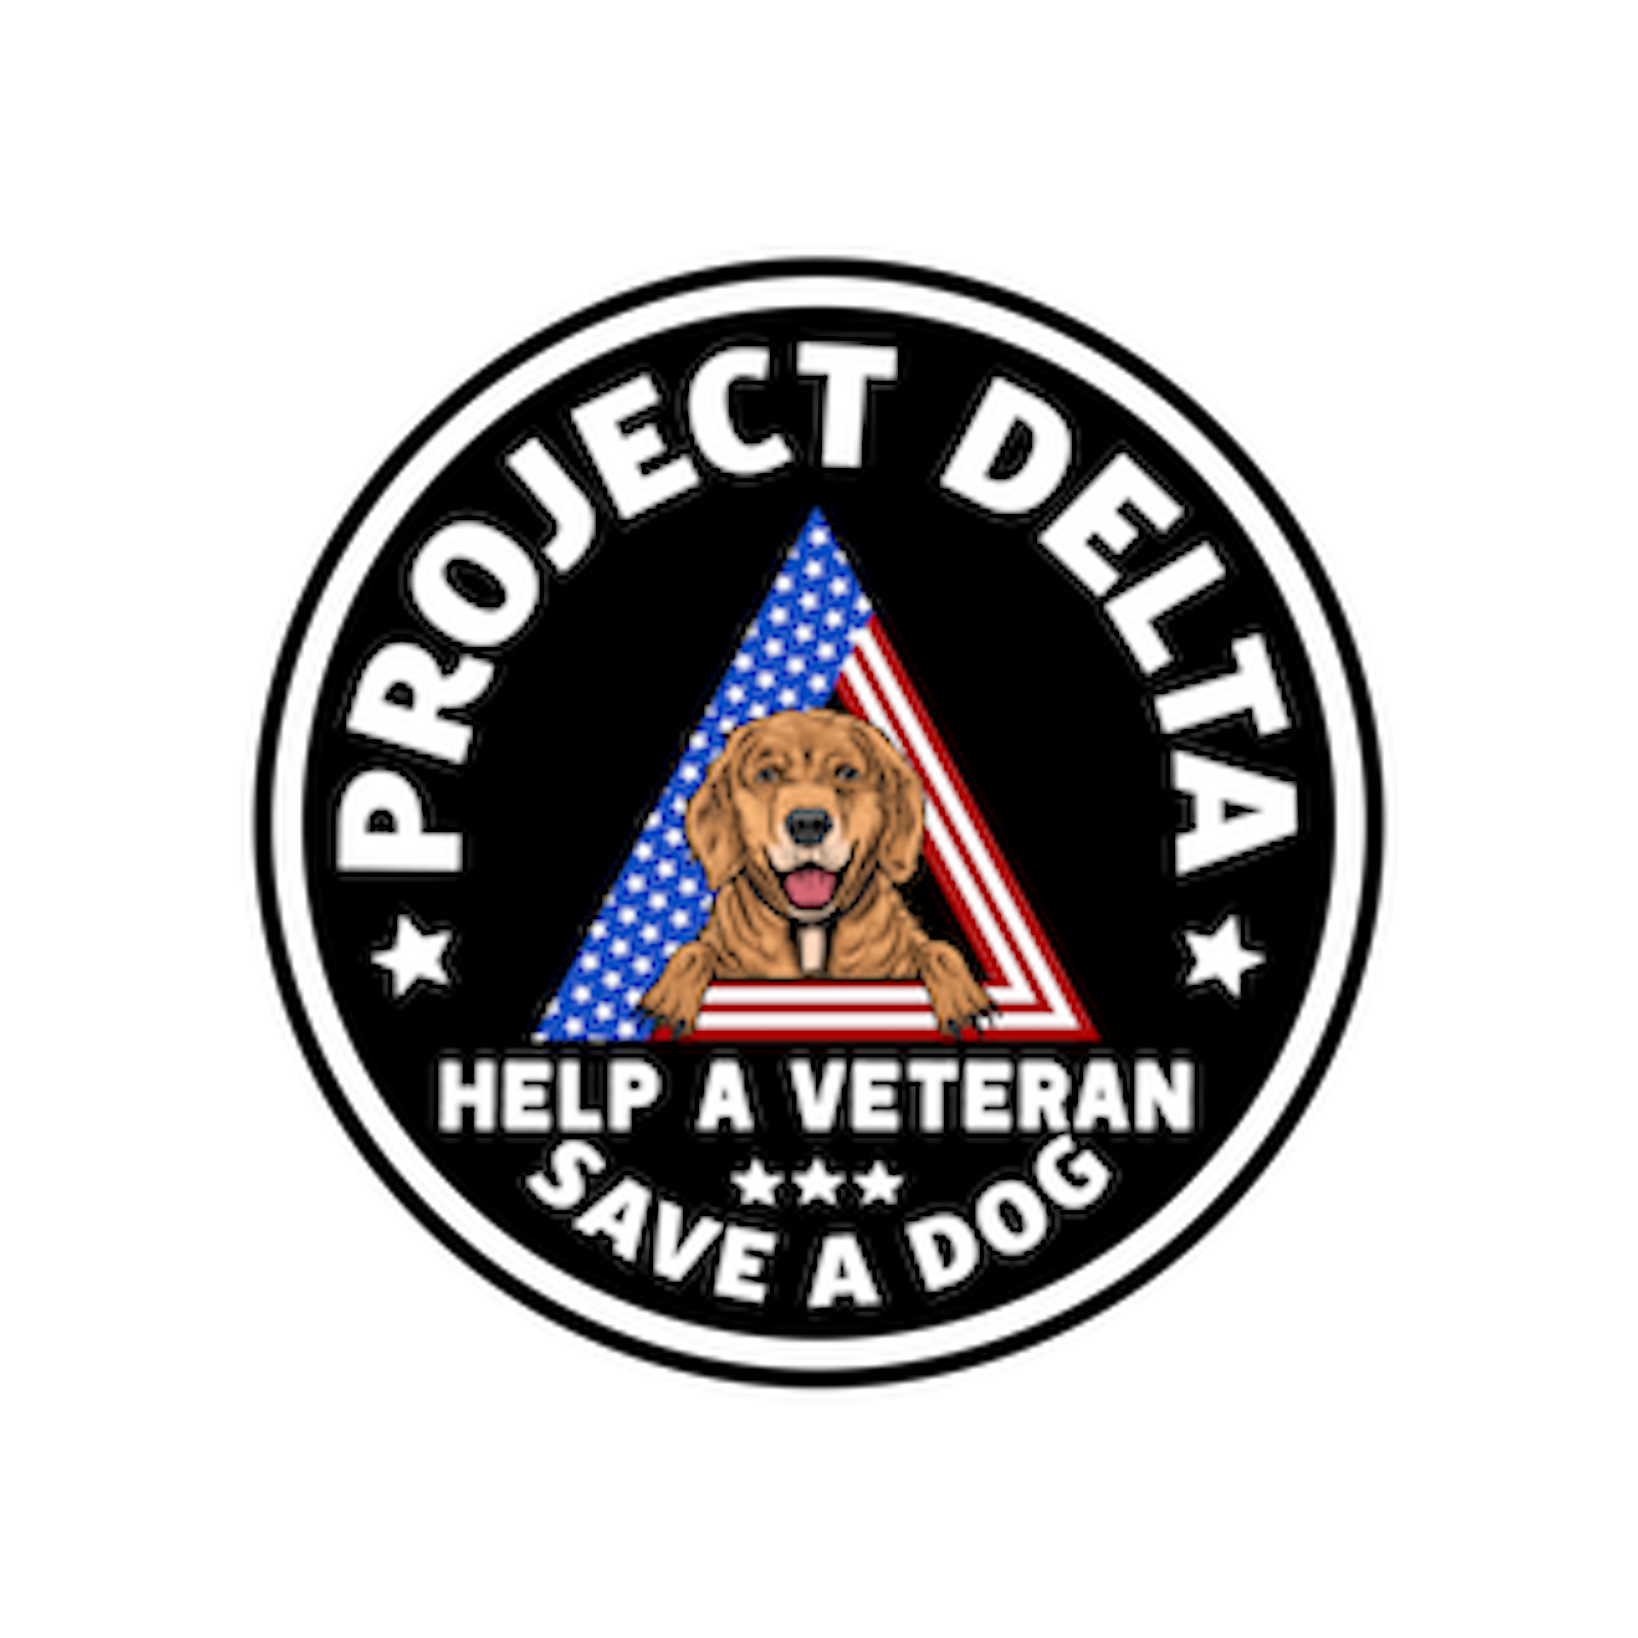 Project-Delta.org